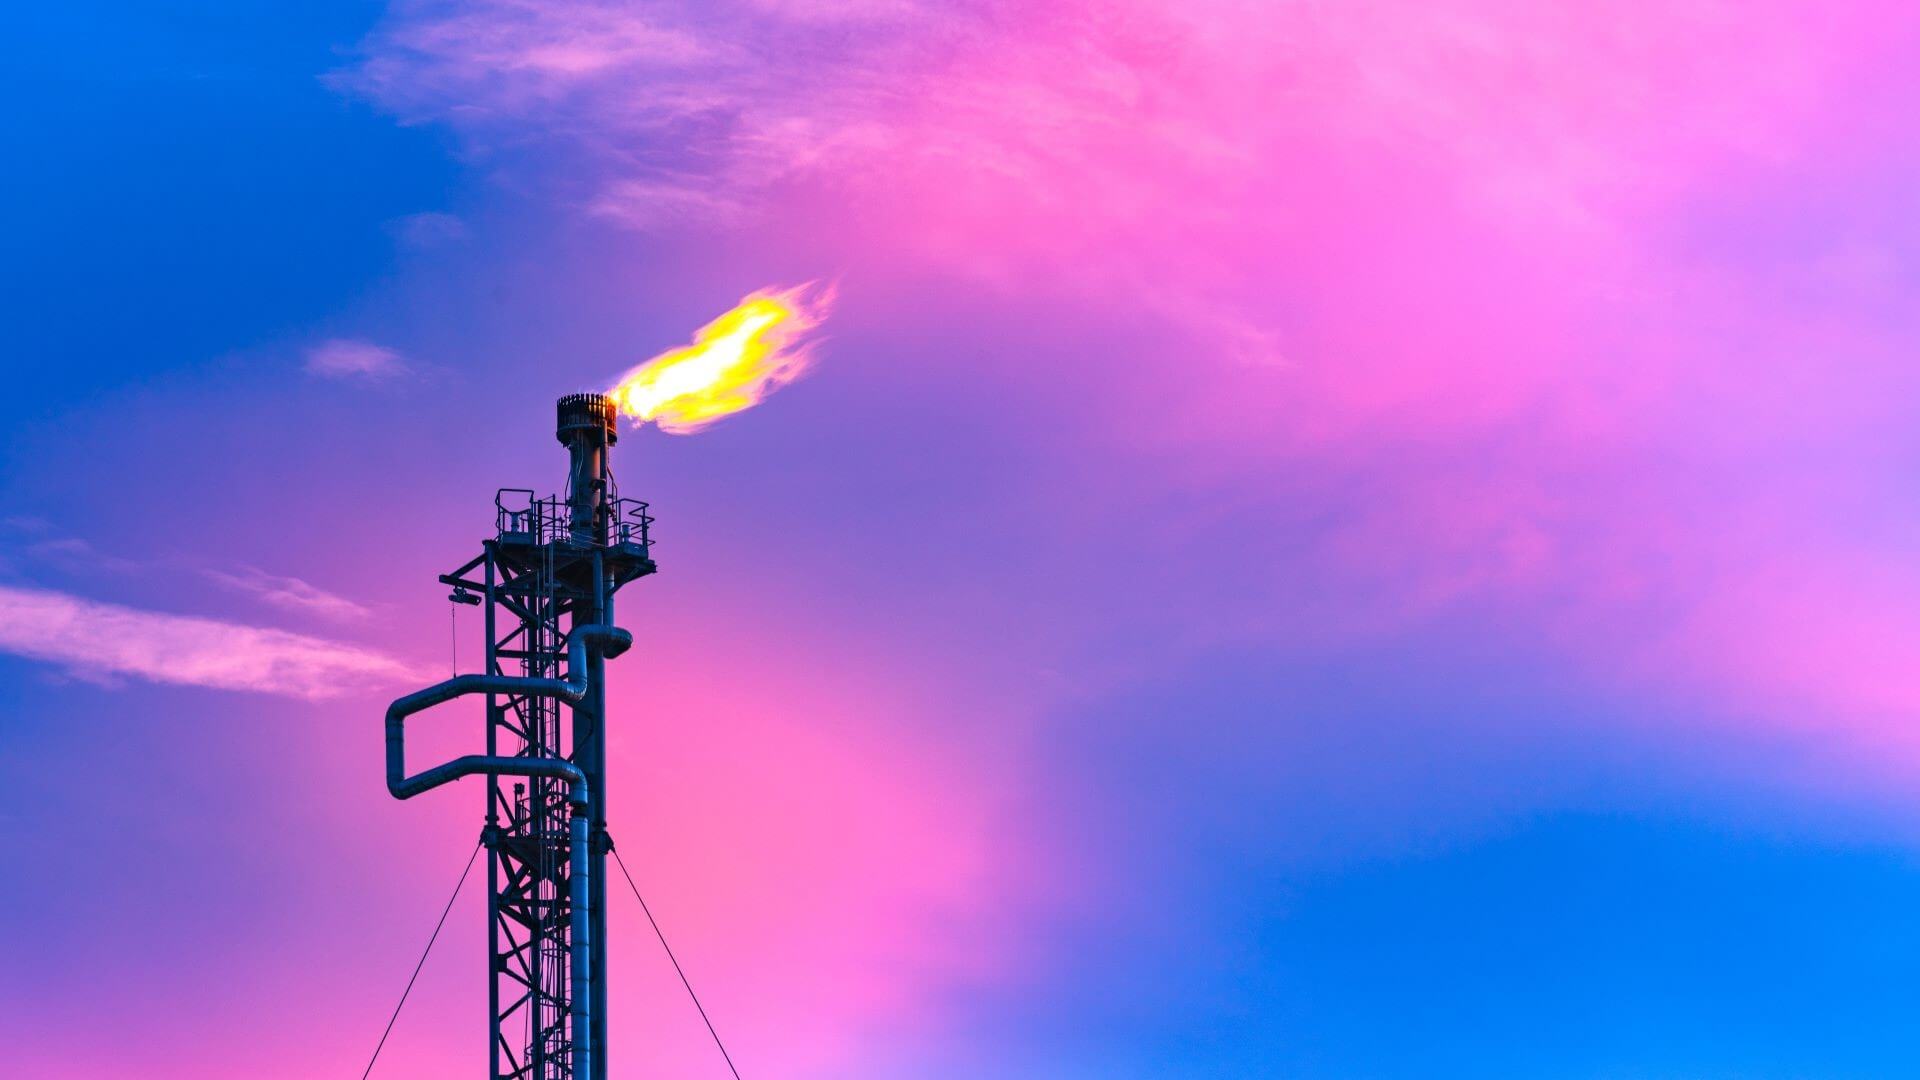 Close up of gas flare set against dramatic blue and pink sky